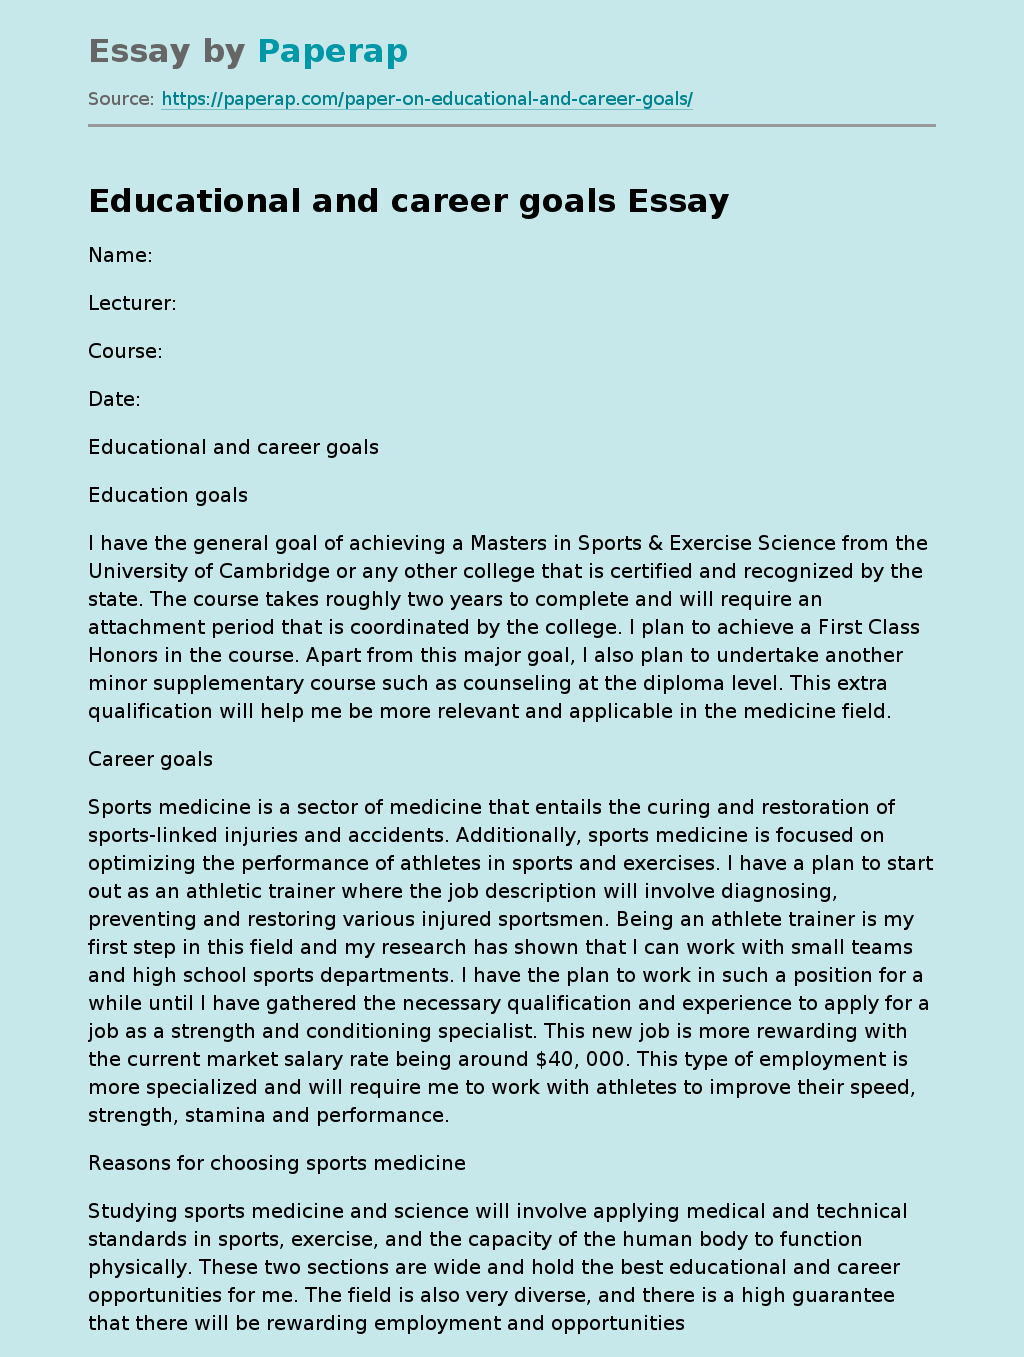 Educational and career goals